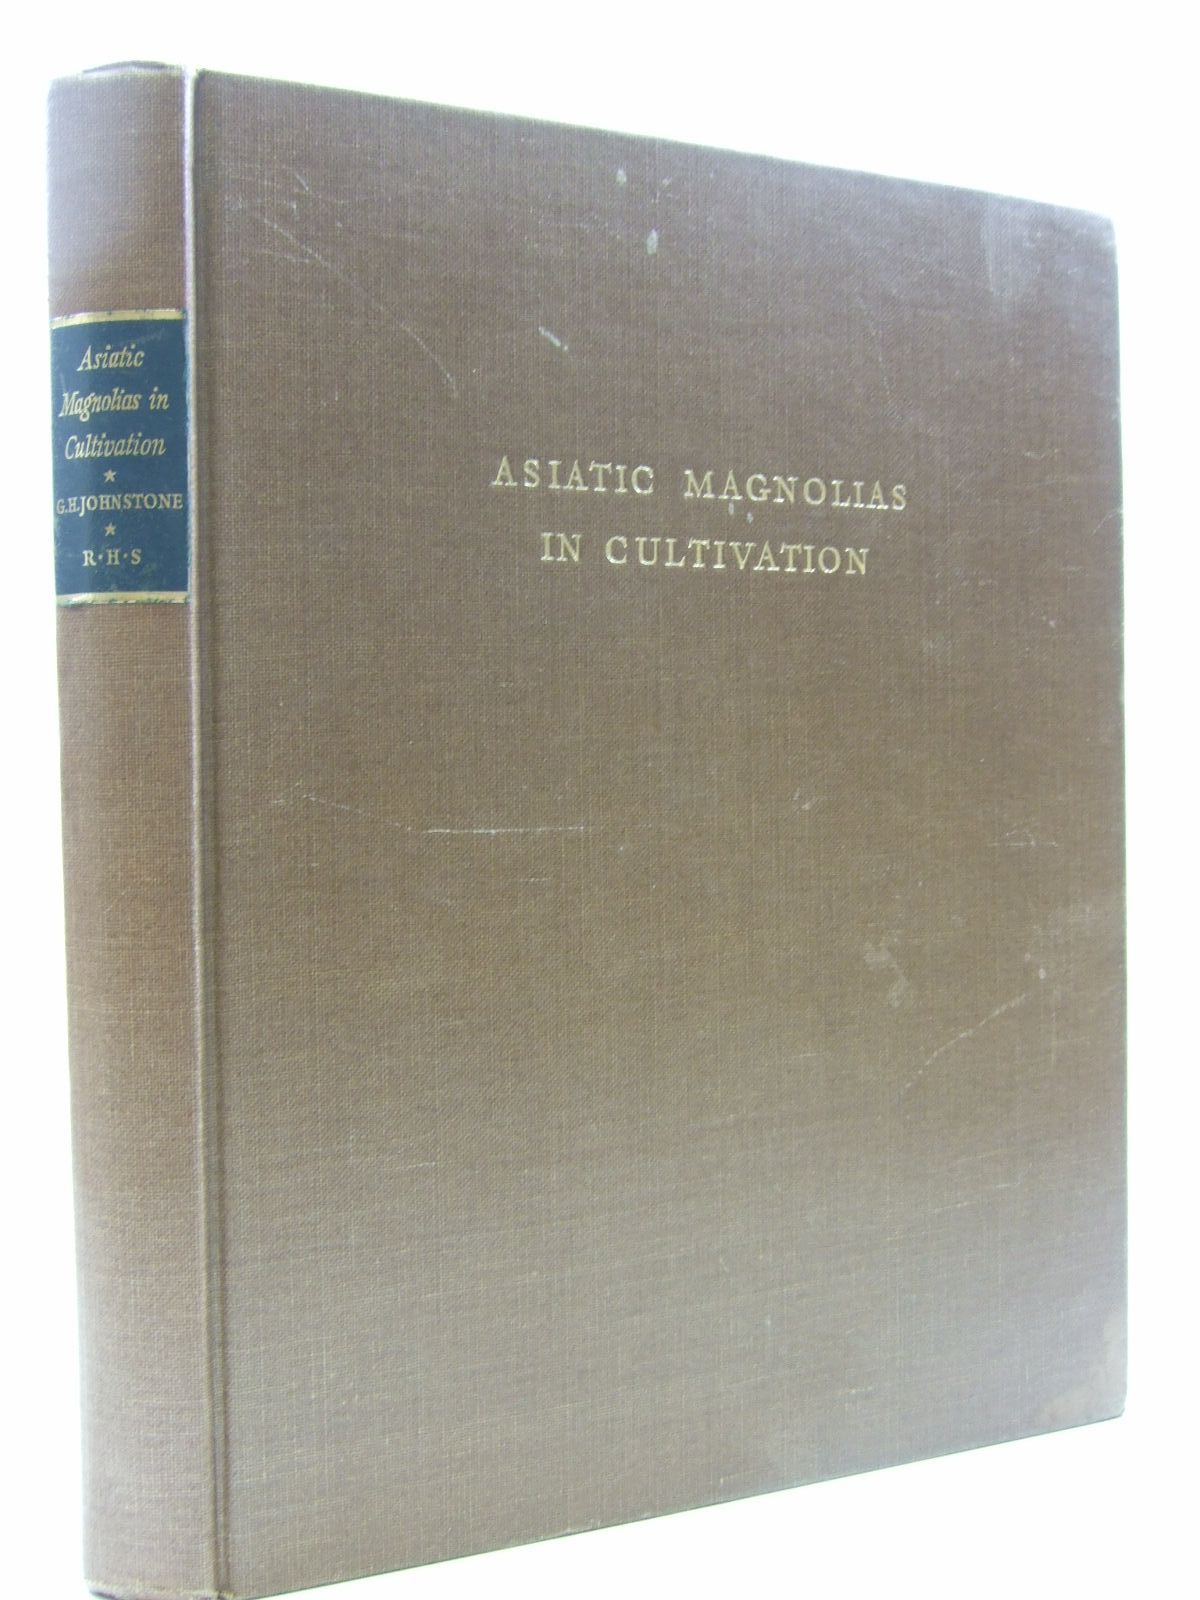 Photo of ASIATIC MAGNOLIAS IN CULTIVATION written by Johnstone, G.H. published by Royal Horticultural society (STOCK CODE: 2109309)  for sale by Stella & Rose's Books